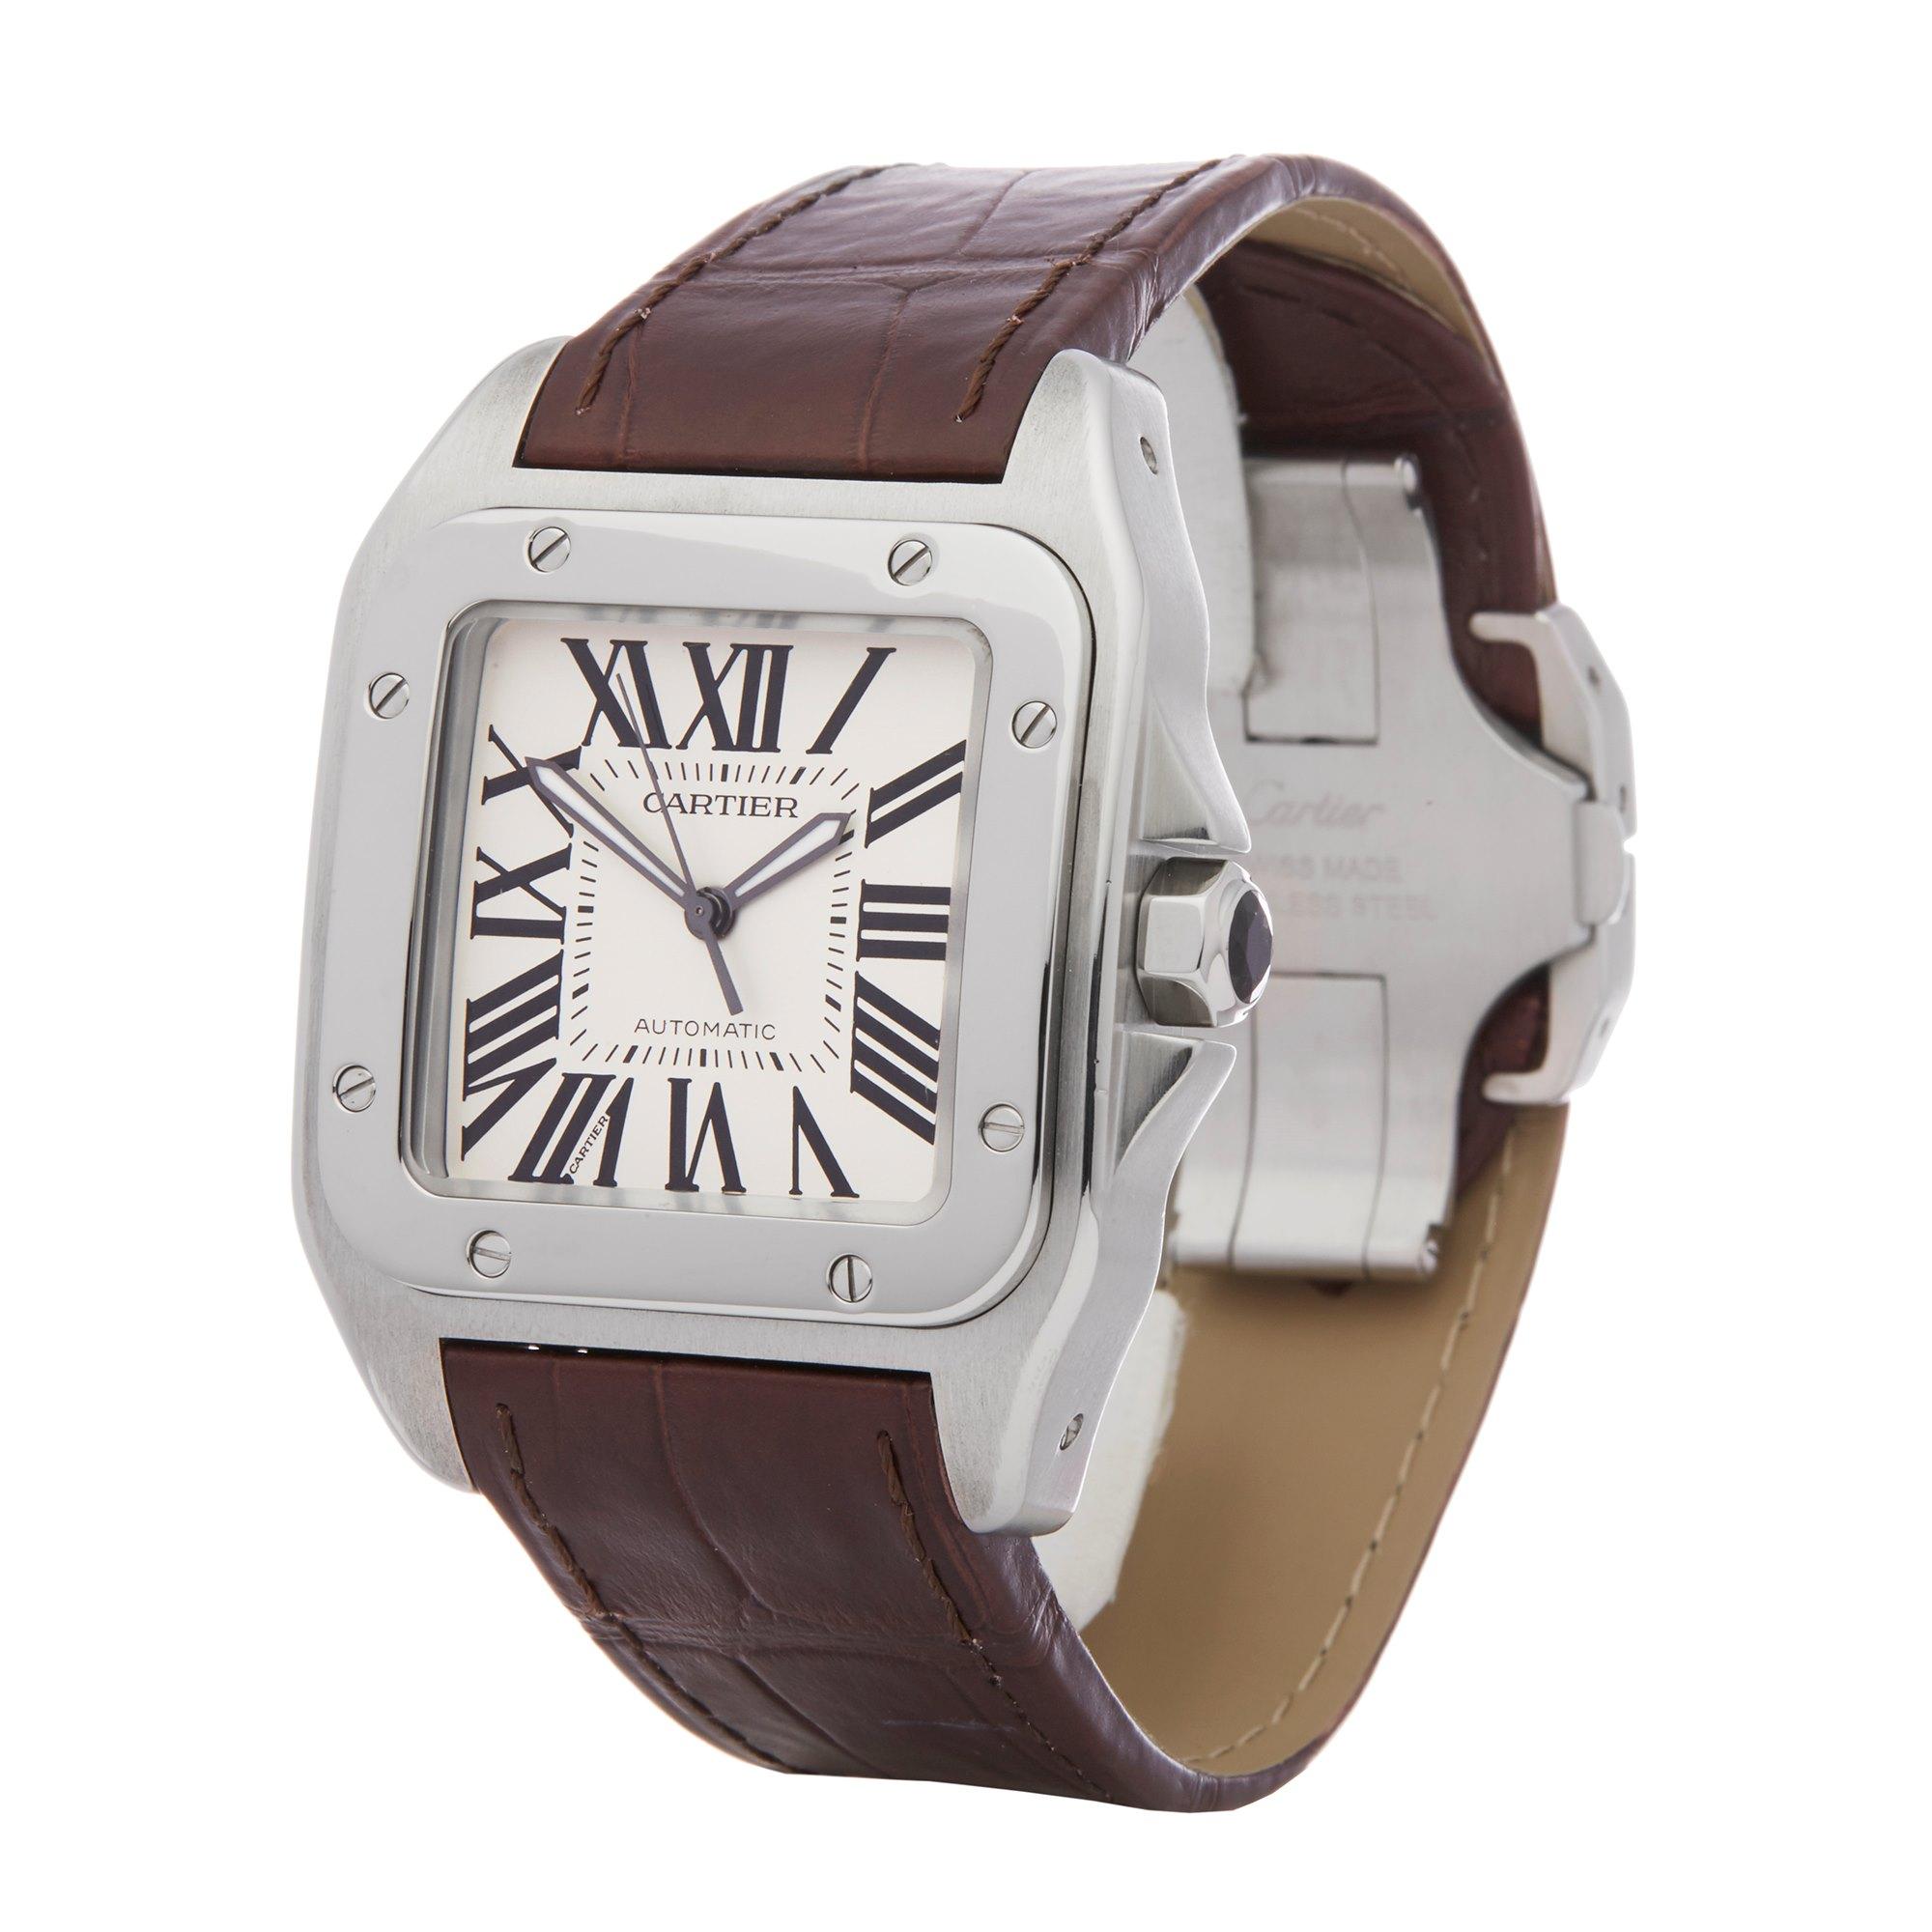 Xupes Reference: W007557
Manufacturer: Cartier
Model: Santos
Model Variant: 100
Model Number: 2656 or W20073X8
Age: 24-02-2011
Gender: Men
Complete With: Cartier Box, Manuals & Guarantee 
Dial: White Roman
Glass: Sapphire Crystal
Case Size: 38mm by